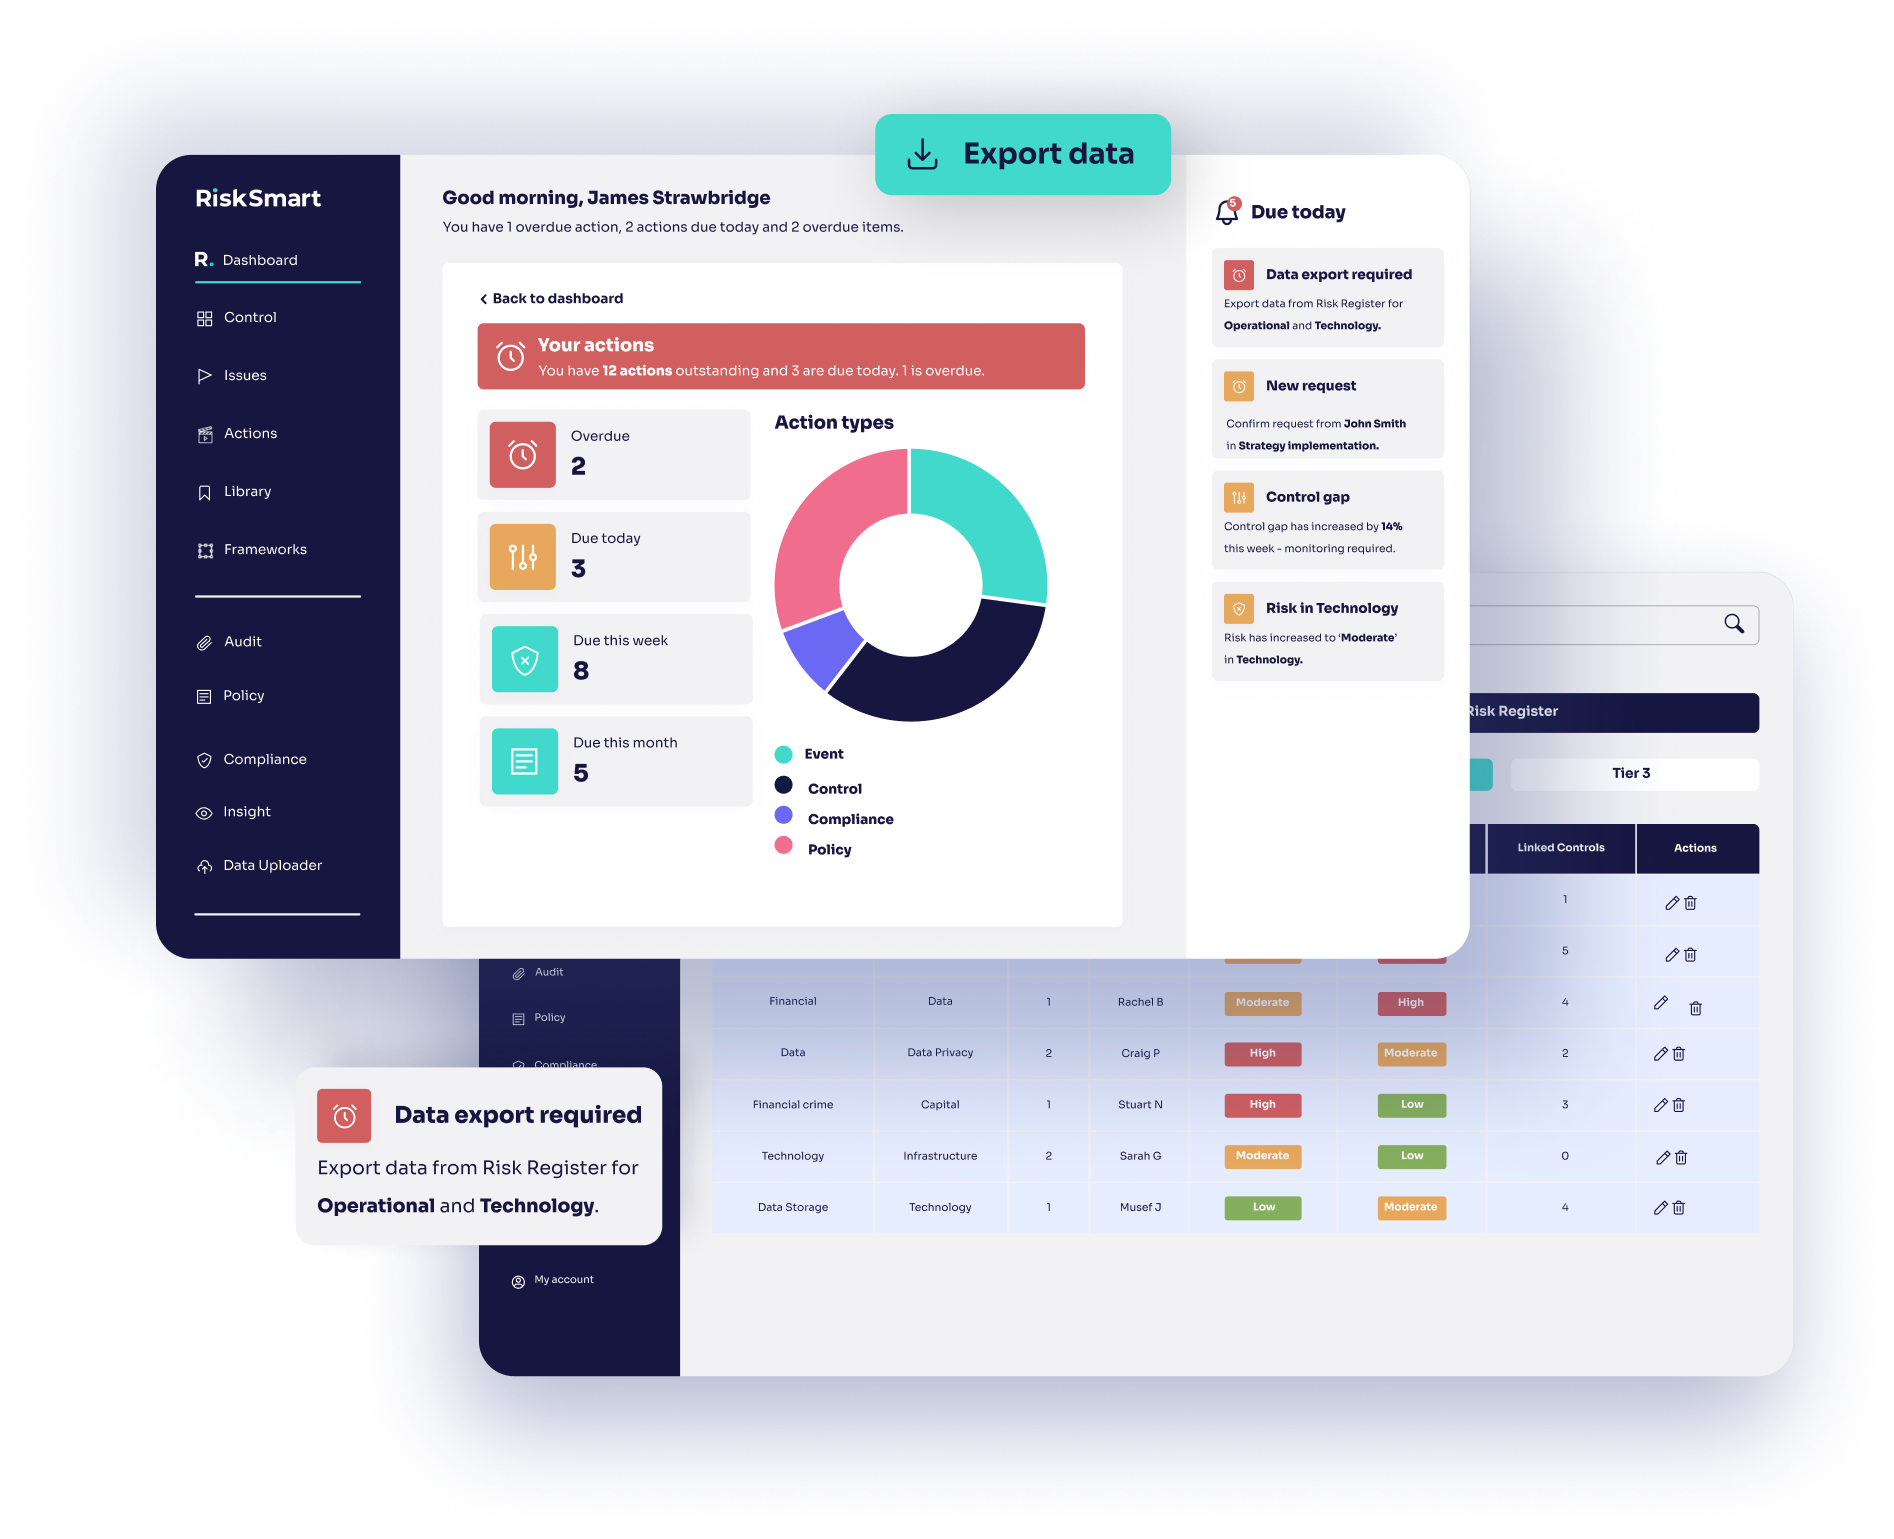 Image of the RiskSmart platform dashboard, a new piece of risk management software. It shows features such as visual reporting, notifications for due actions, and a risk library with risk appetites.